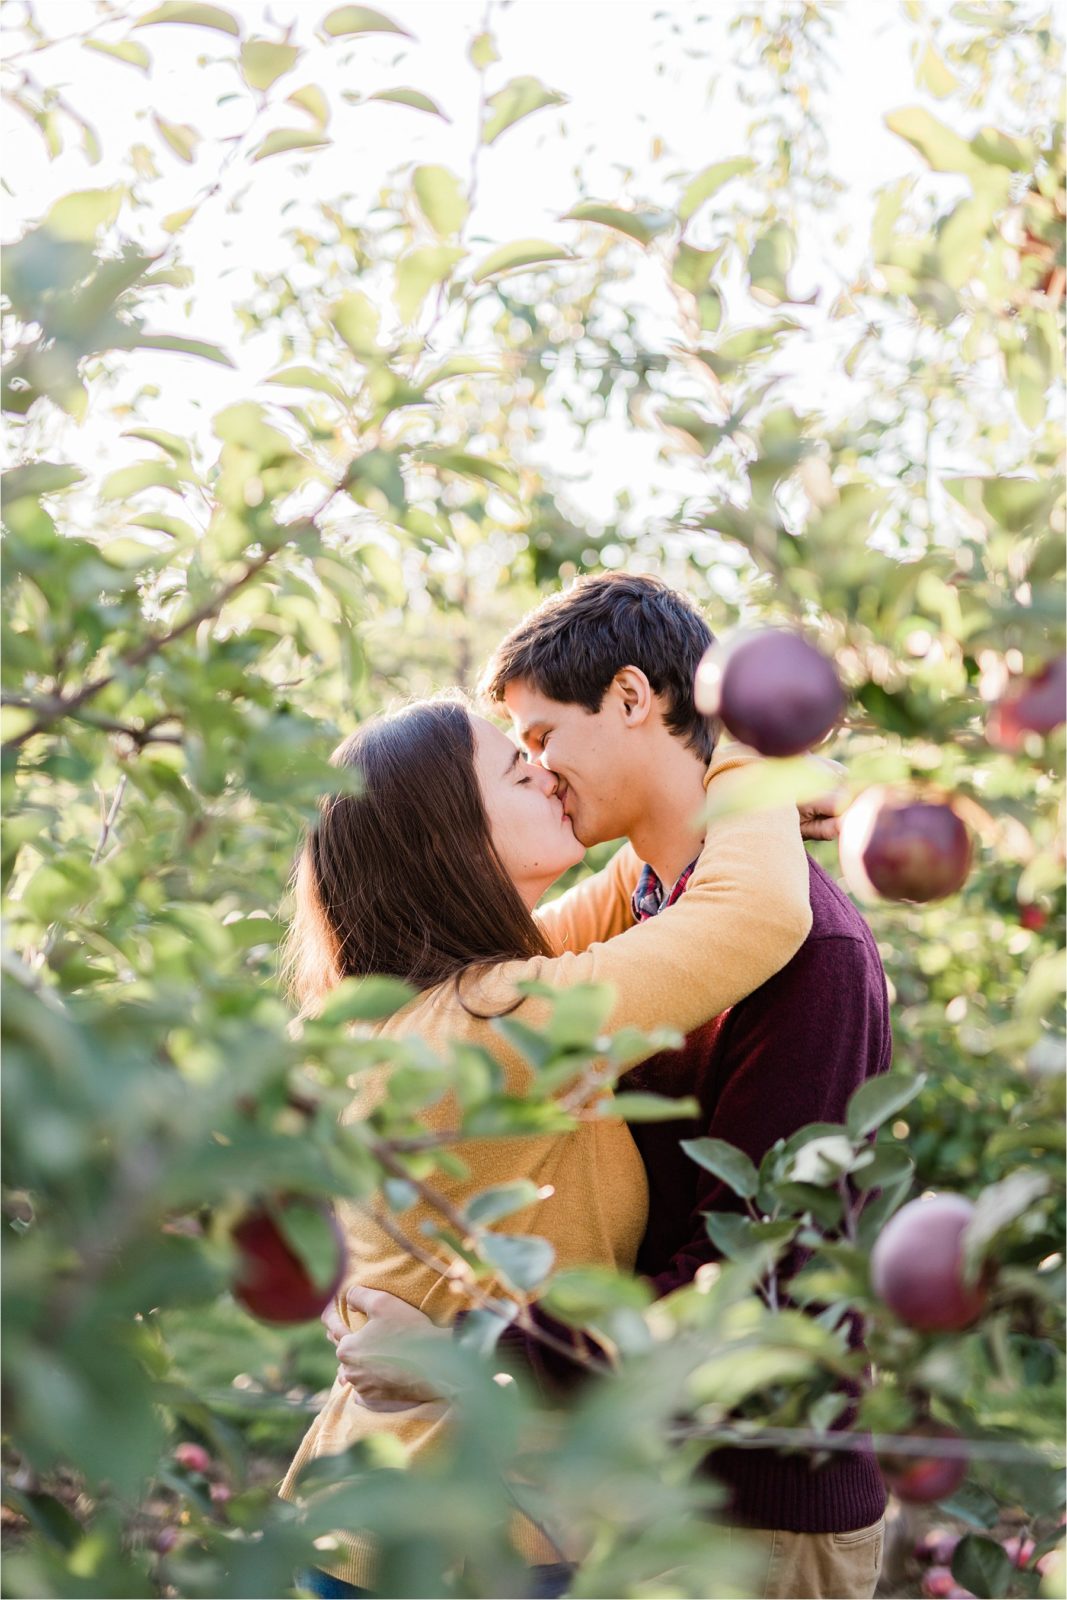 Engagement photos at an apple orchard